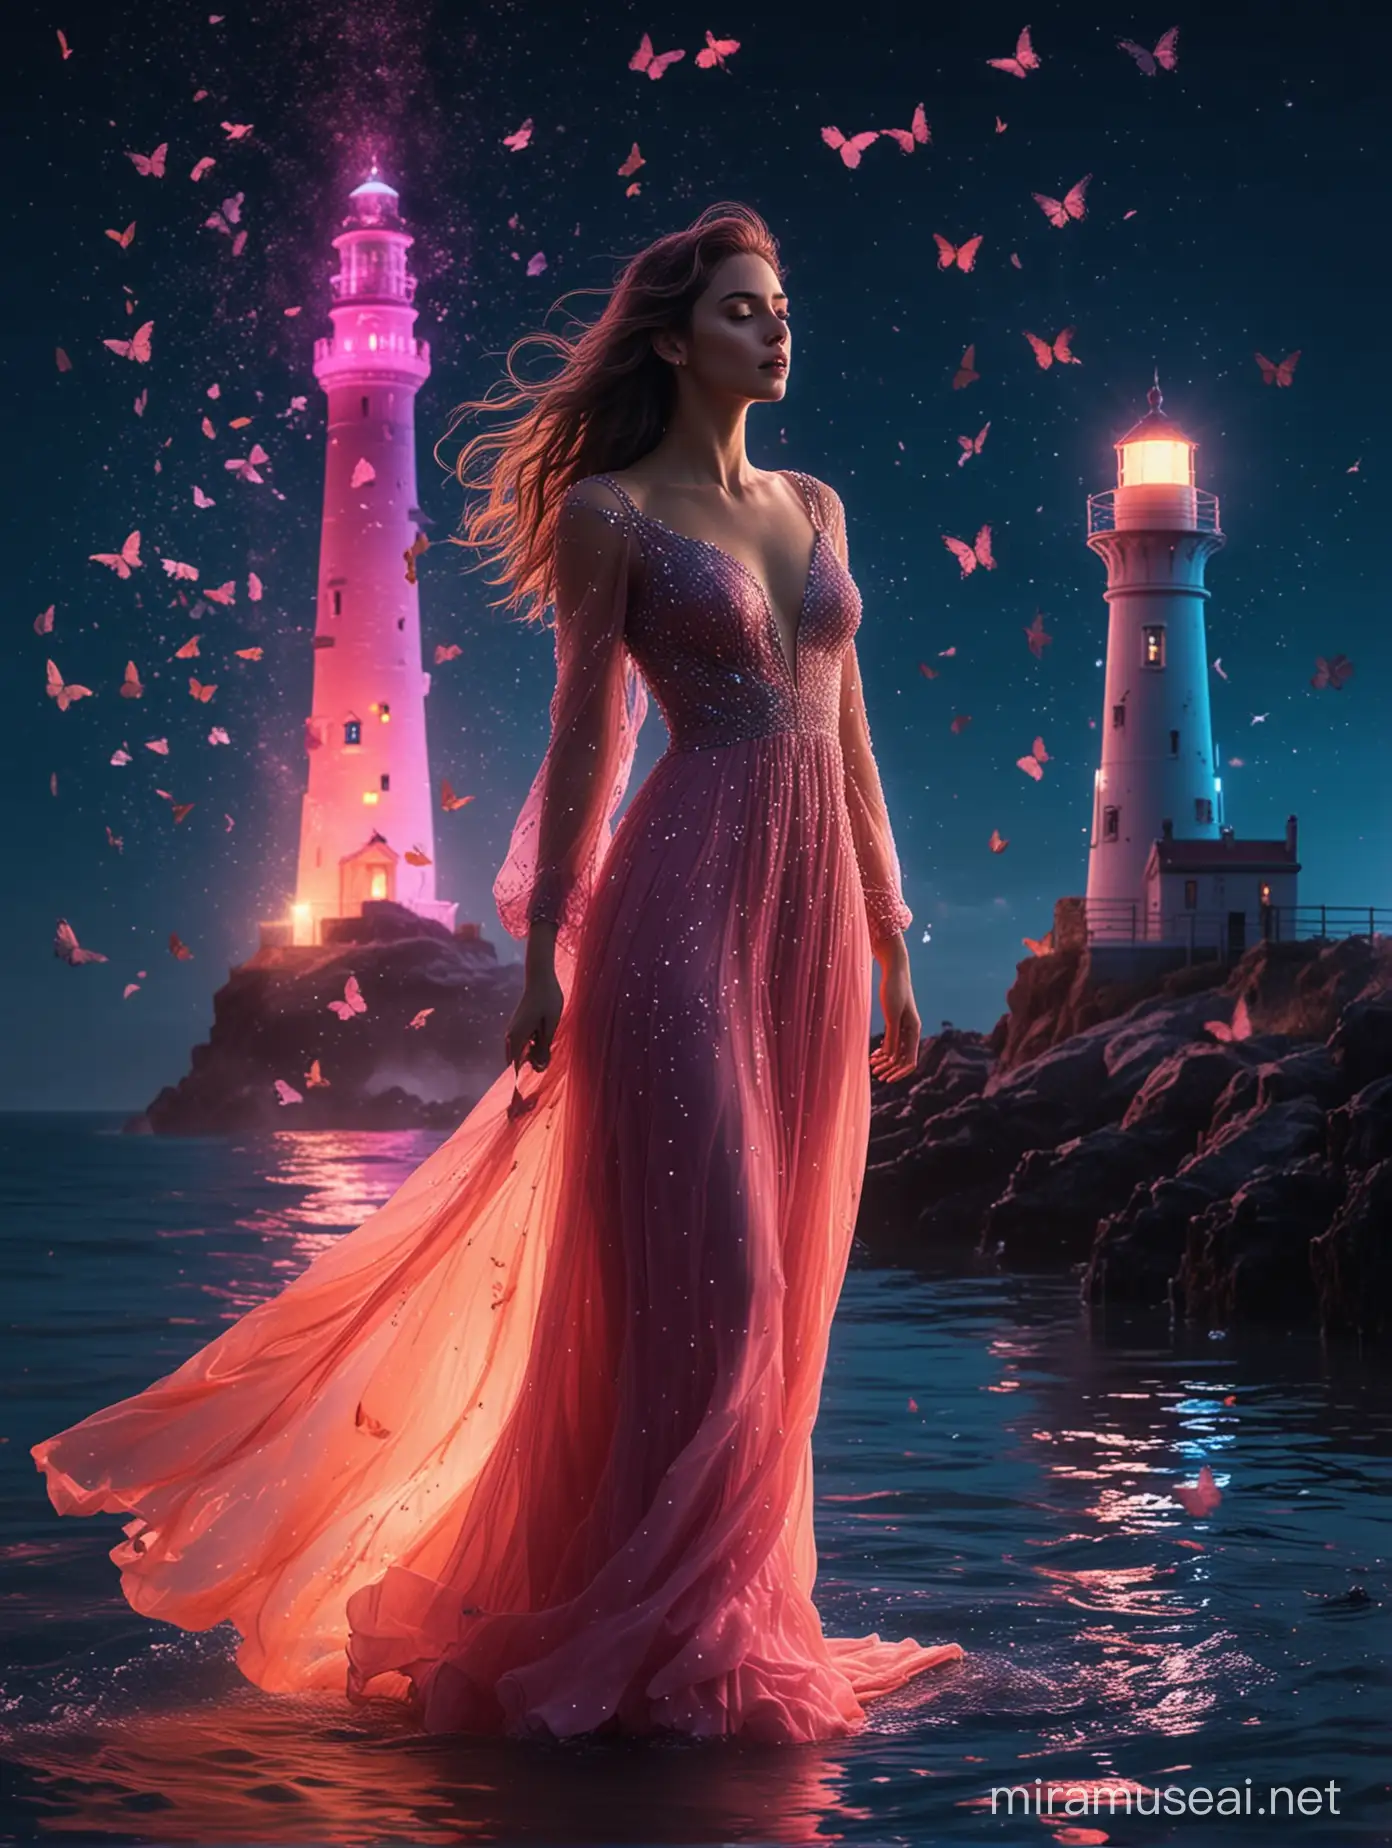 Aivision,a woman, beautiful face in a long gown standing into the water, she slowly fades away into butterflies and windy dust, you see a lighthouse in the background, the water is very sparkly, neon color, elegant, neon colors